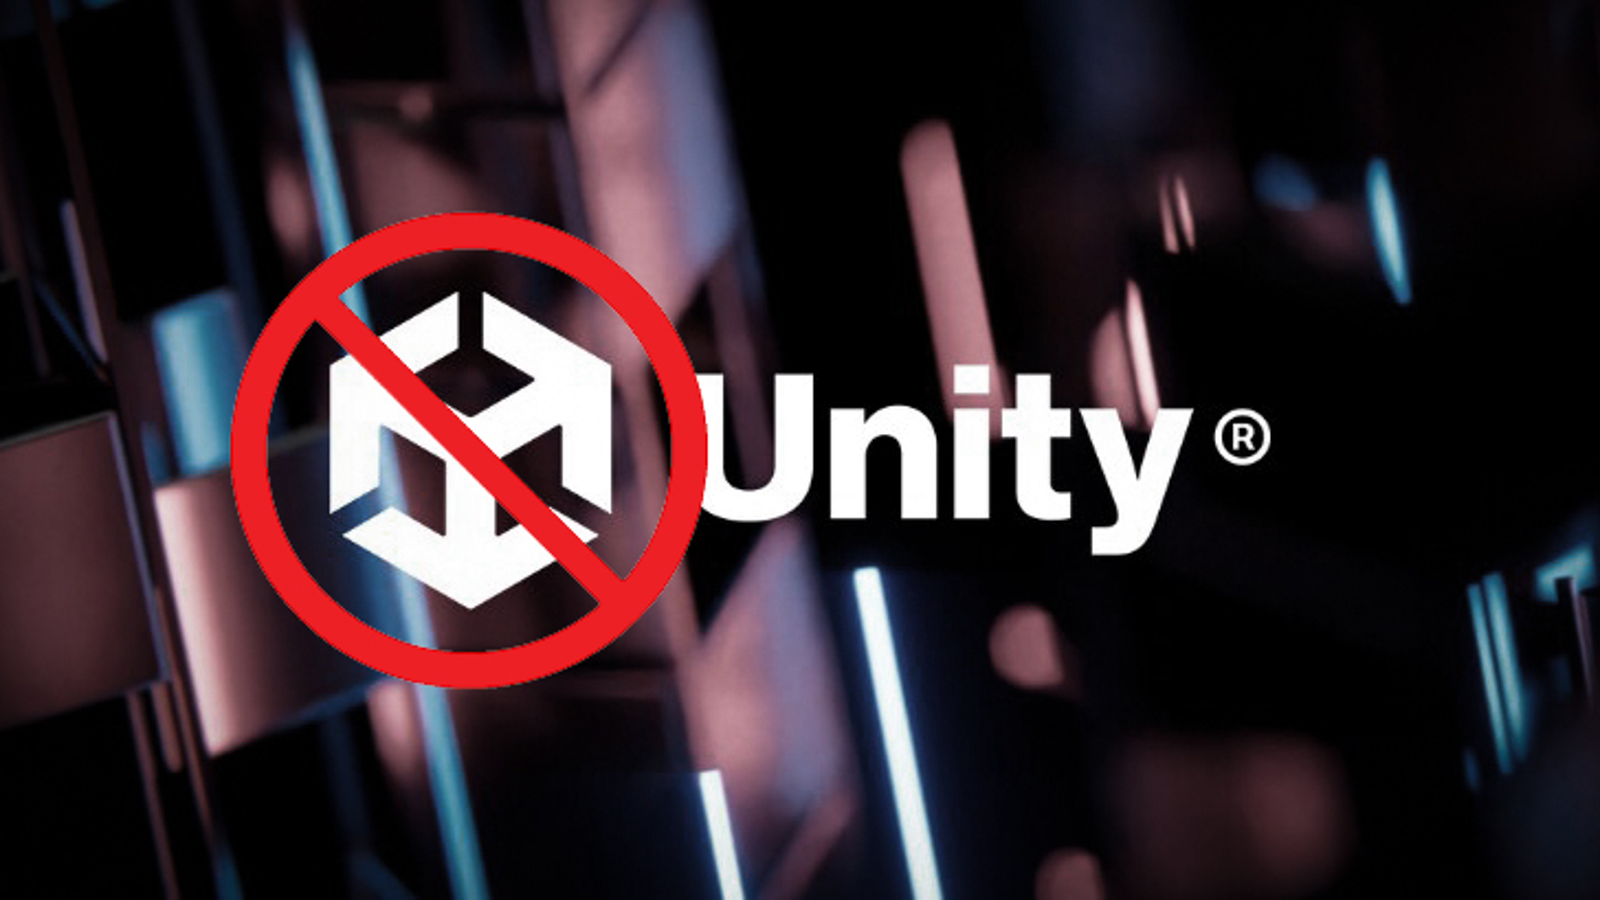 Unreal Engine for Unity Developers